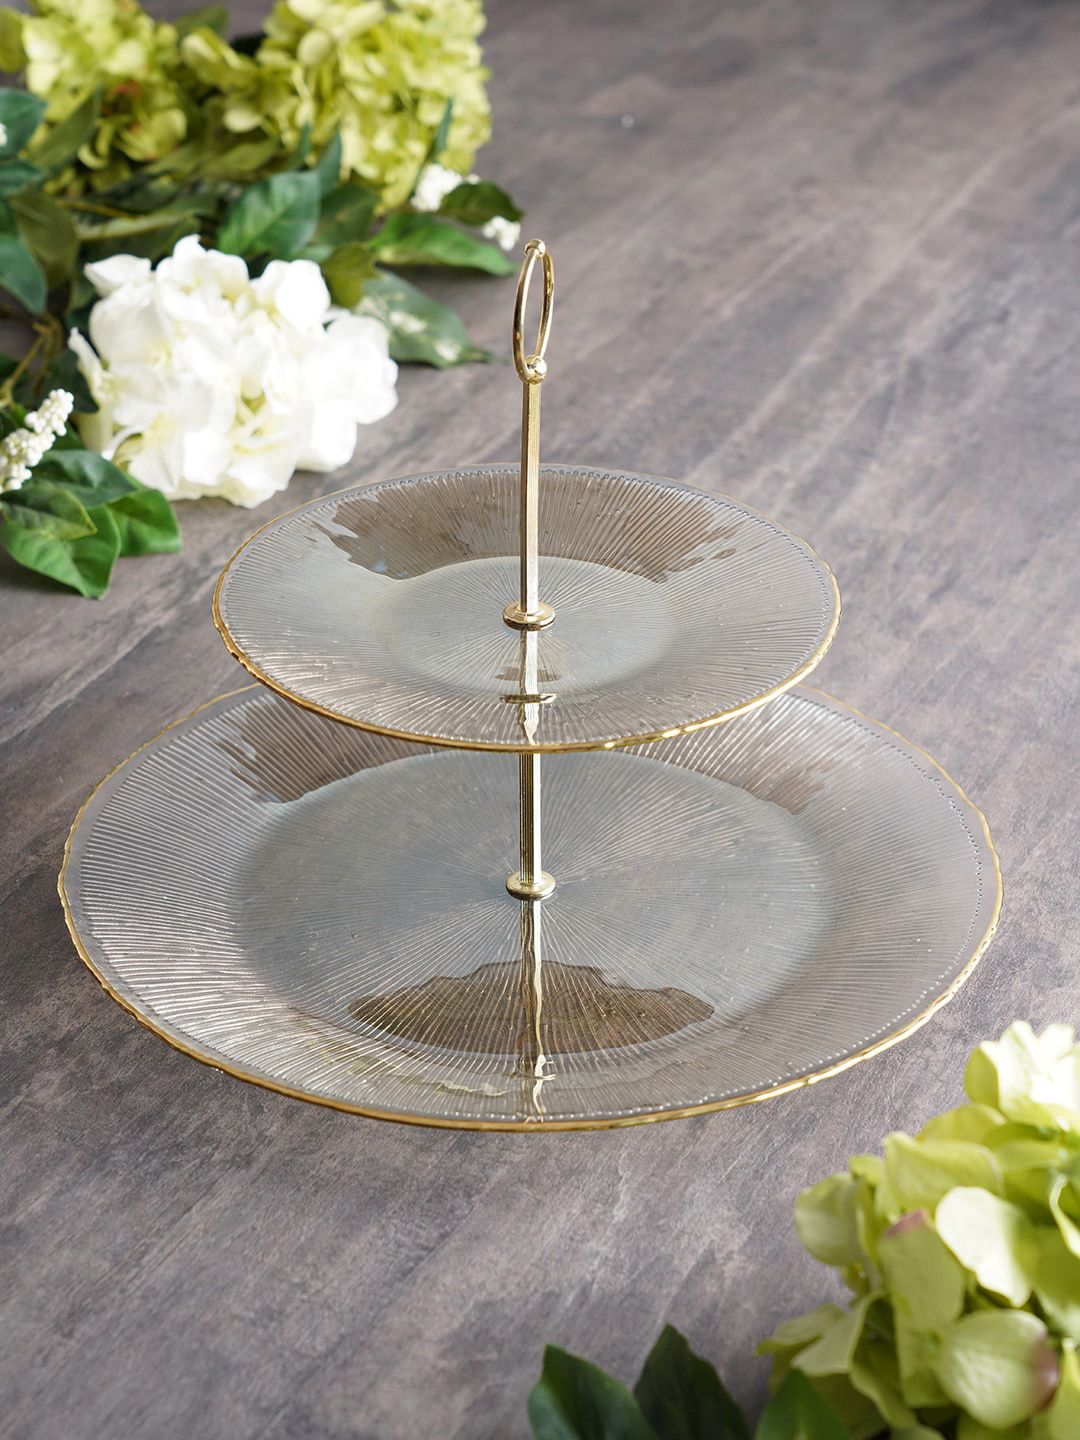 Pure Home and Living Textured Cake Stand Price in India